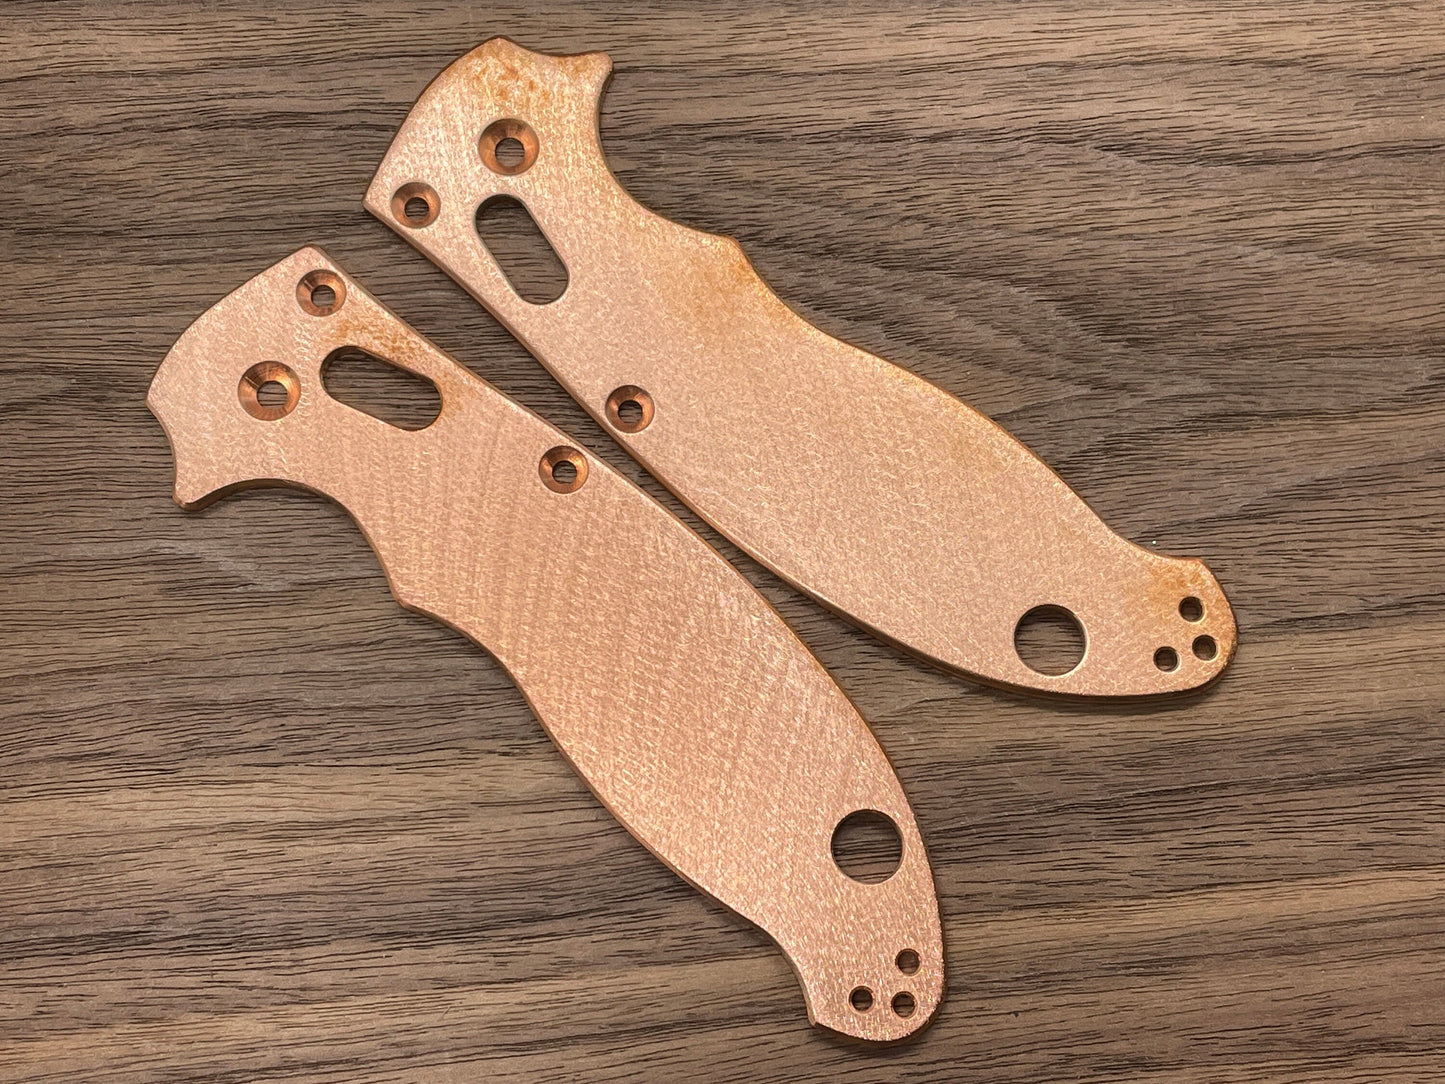 Deep BRUSHED Copper scales for Spyderco MANIX 2